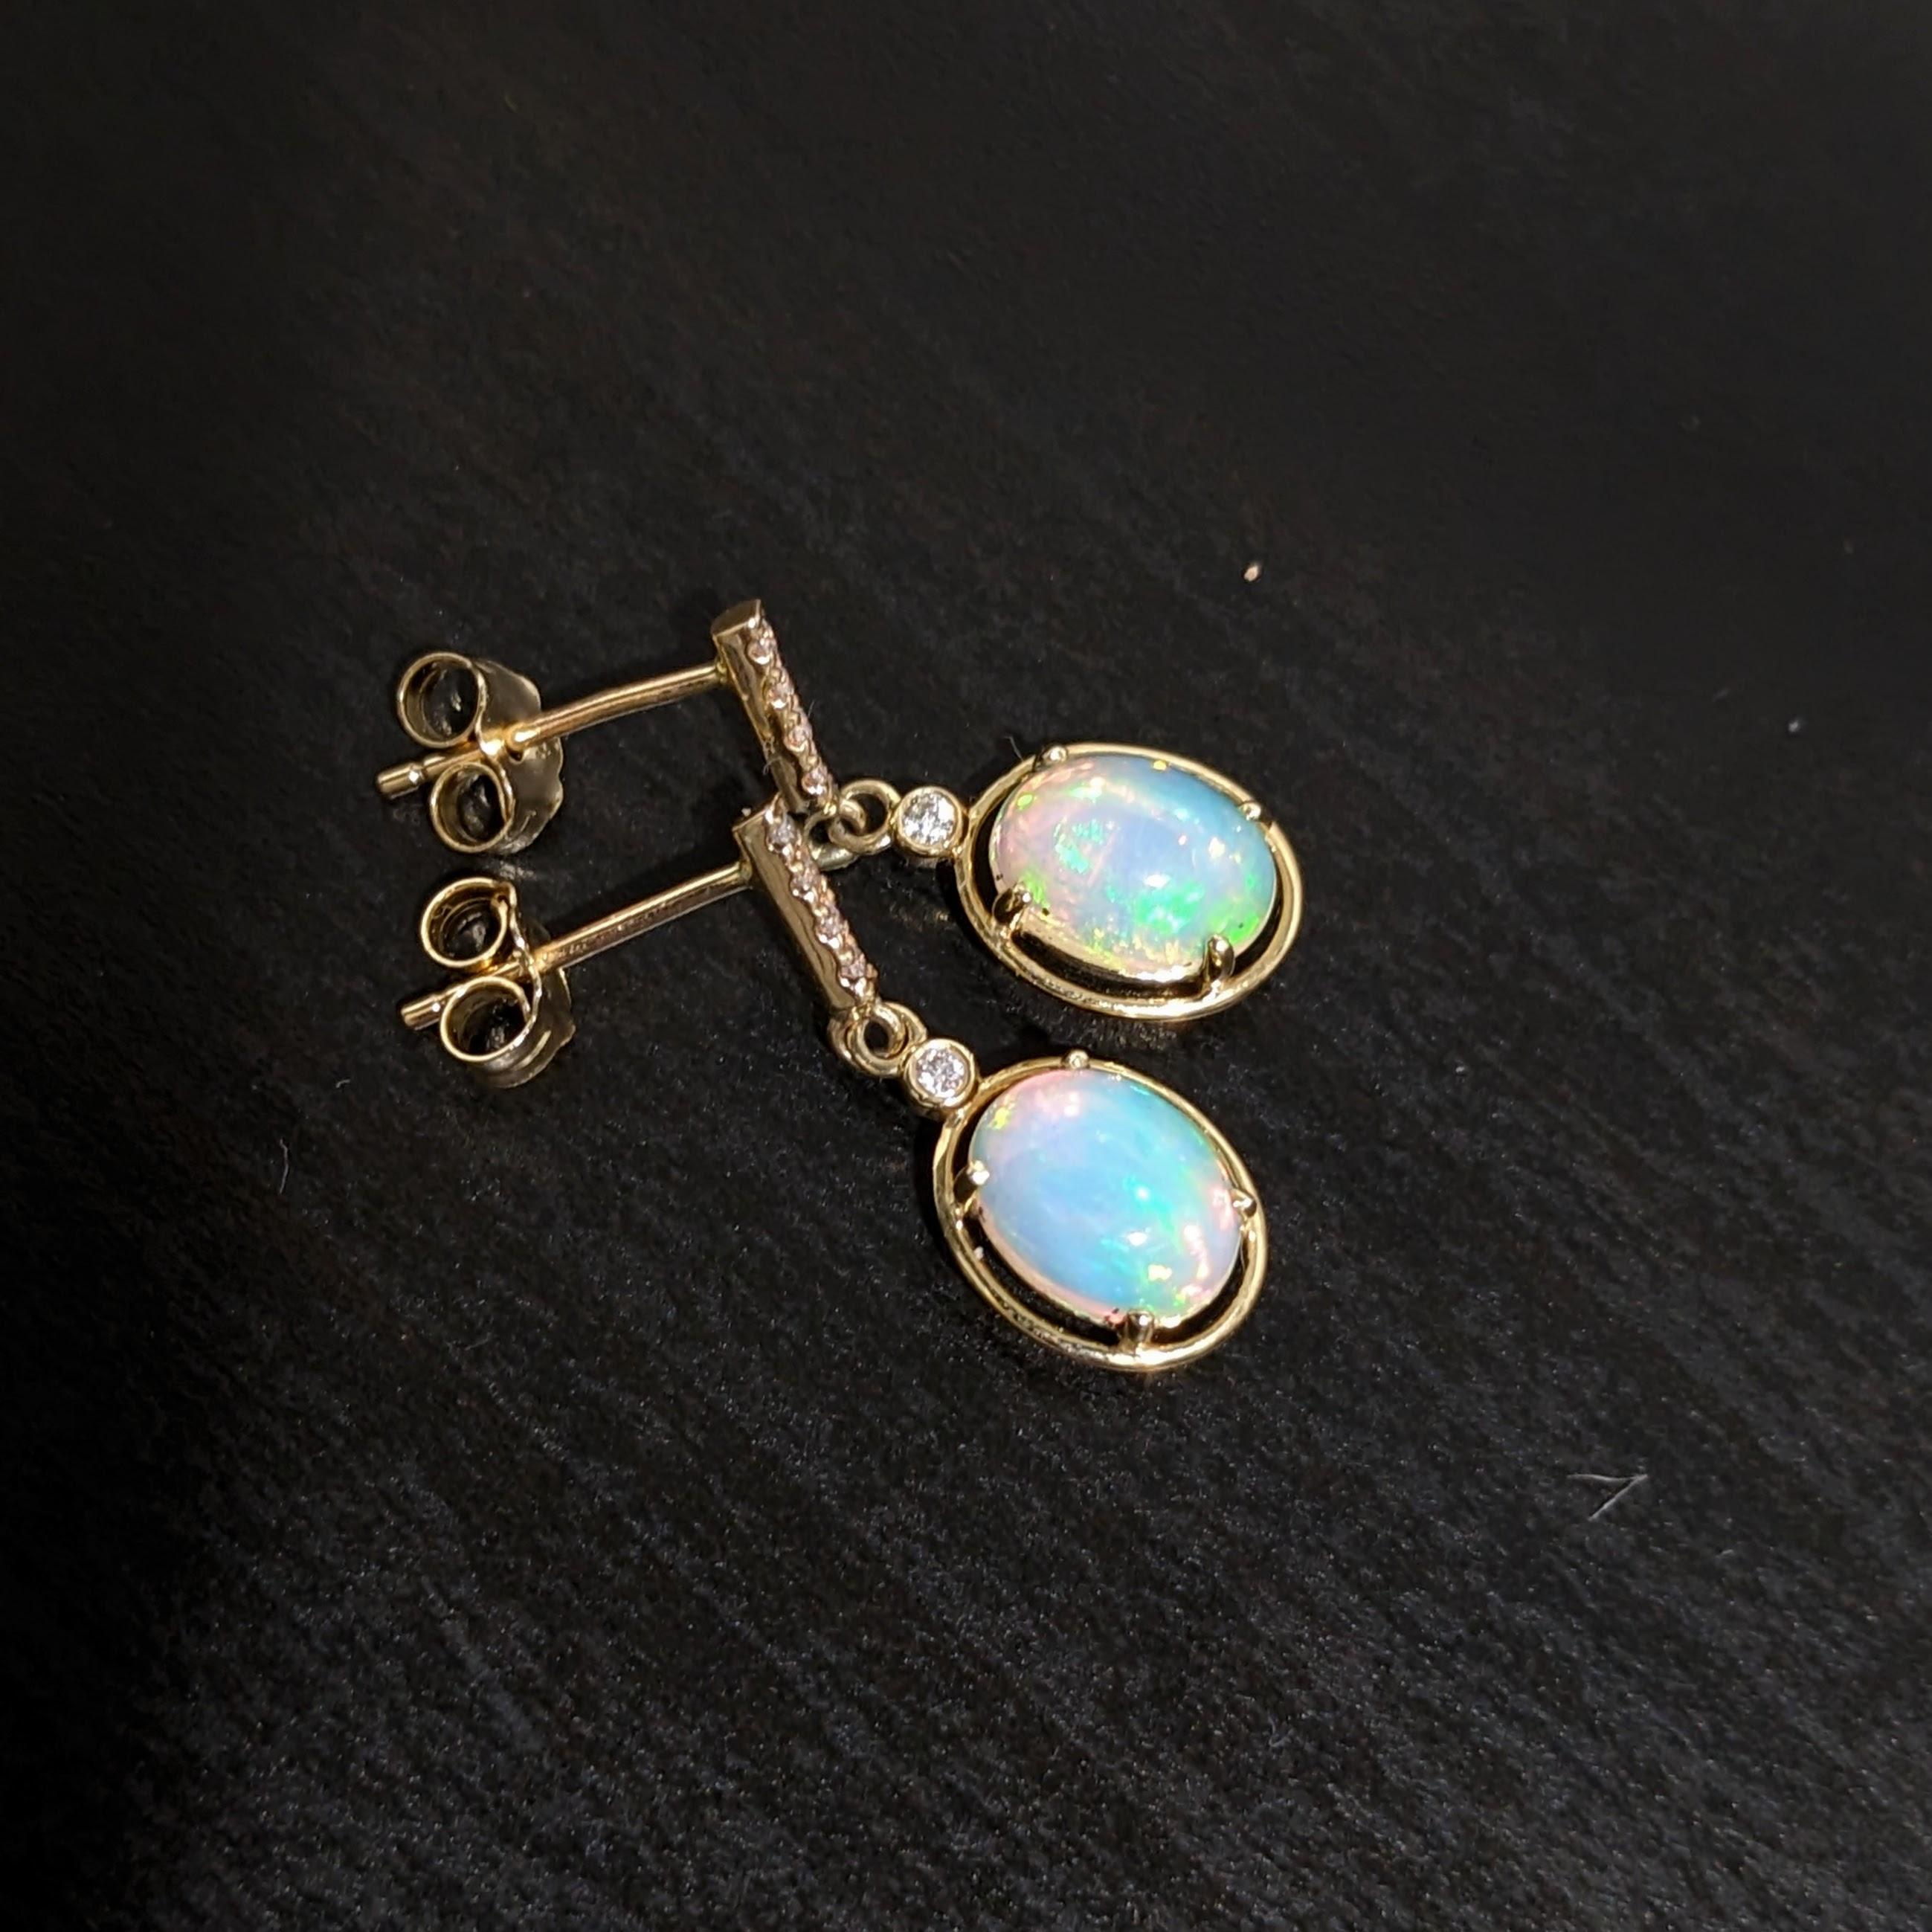 Oval Cut 1.63ct Dangly Opal Drops w Diamond Accents in 14k Solid Yellow Gold Oval 10x8mm